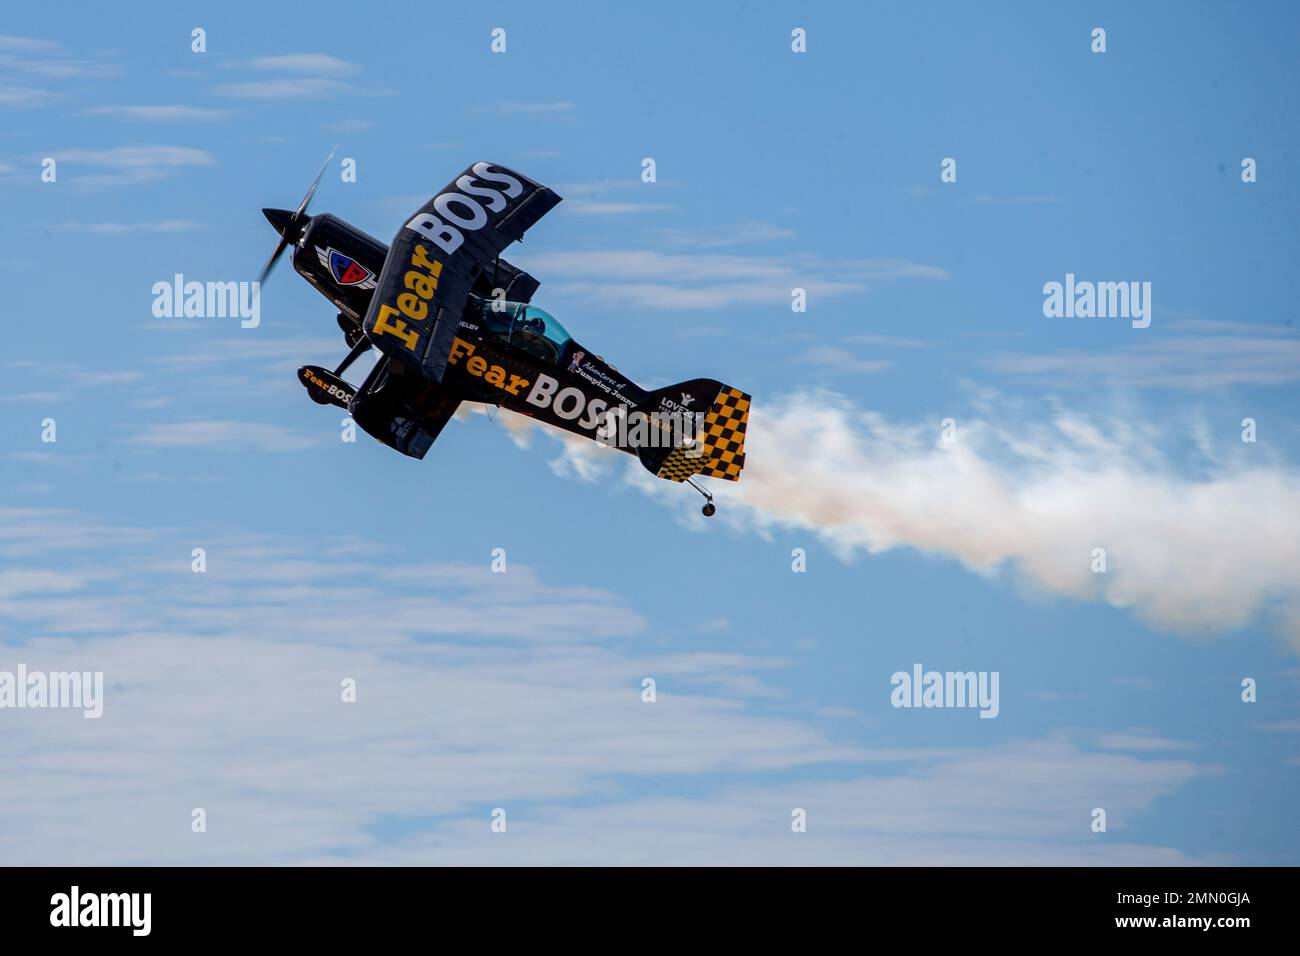 Jon Melby, piloting his Pitts S-1B Muscle Bi-Plane, performs aerobatics during the 2022 Marine Corps Air Station Miramar Air Show at MCAS Miramar, San Diego, California, Sept. 24, 2022. Melby has been performing at air shows since 2001. The theme for the 2022 MCAS Miramar Air Show, “Marines Fight, Evolve and Win,” reflects the Marine Corps’ ongoing modernization efforts to prepare for future conflicts. Stock Photo